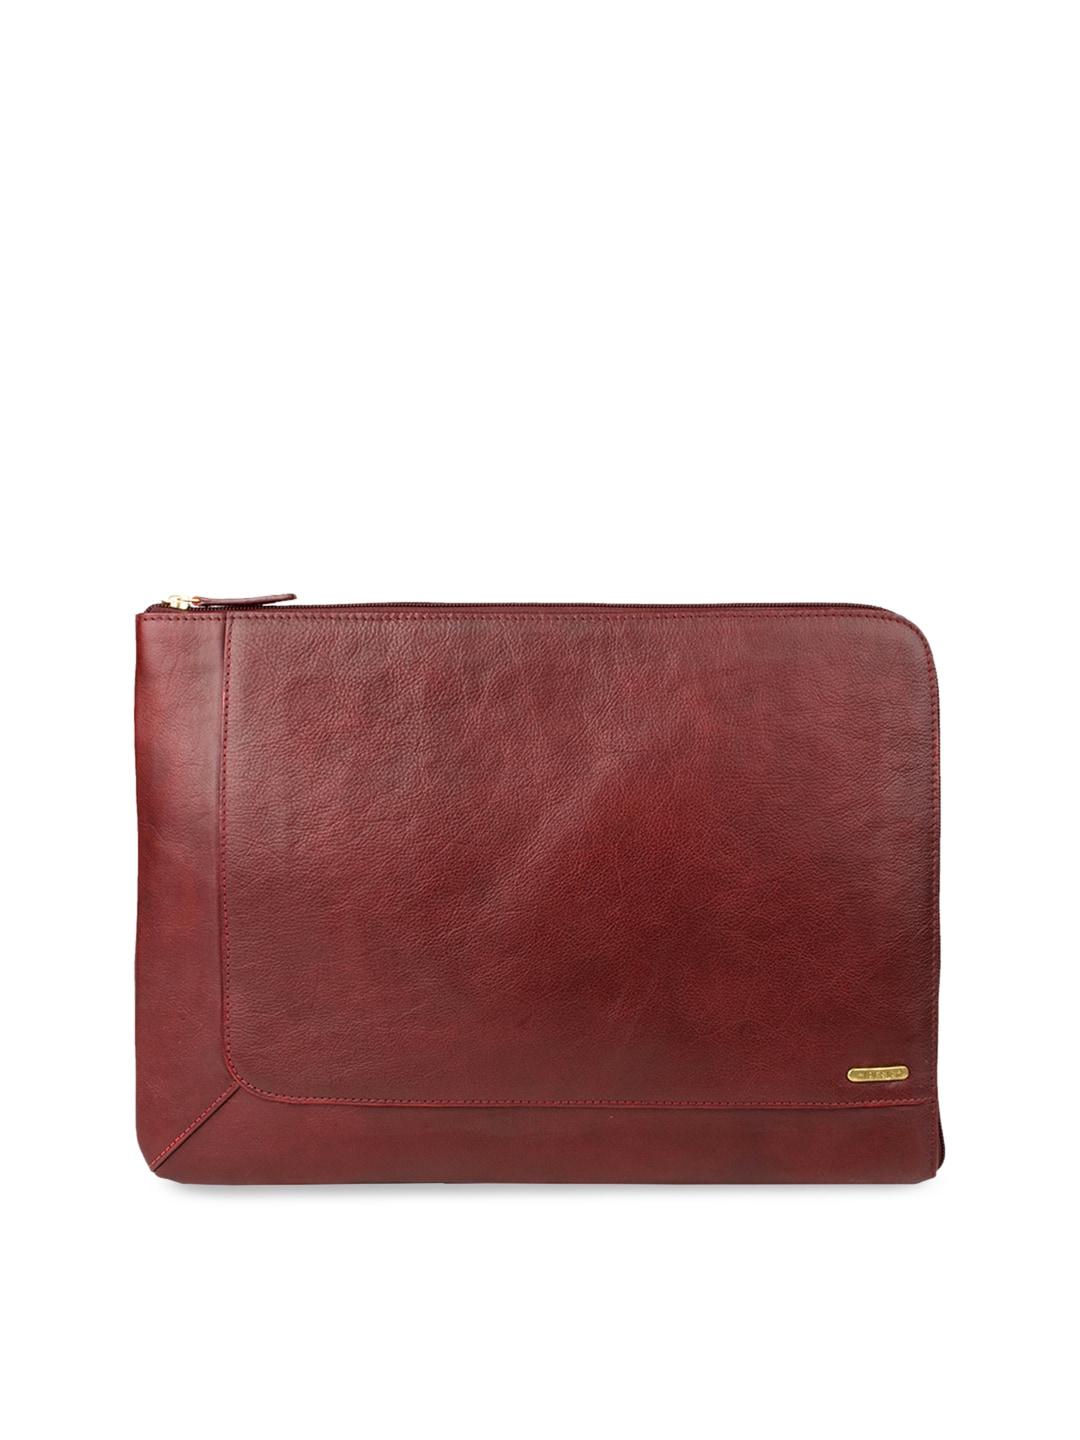 hidesign-men-red-solid-leather-laptop-sleeve